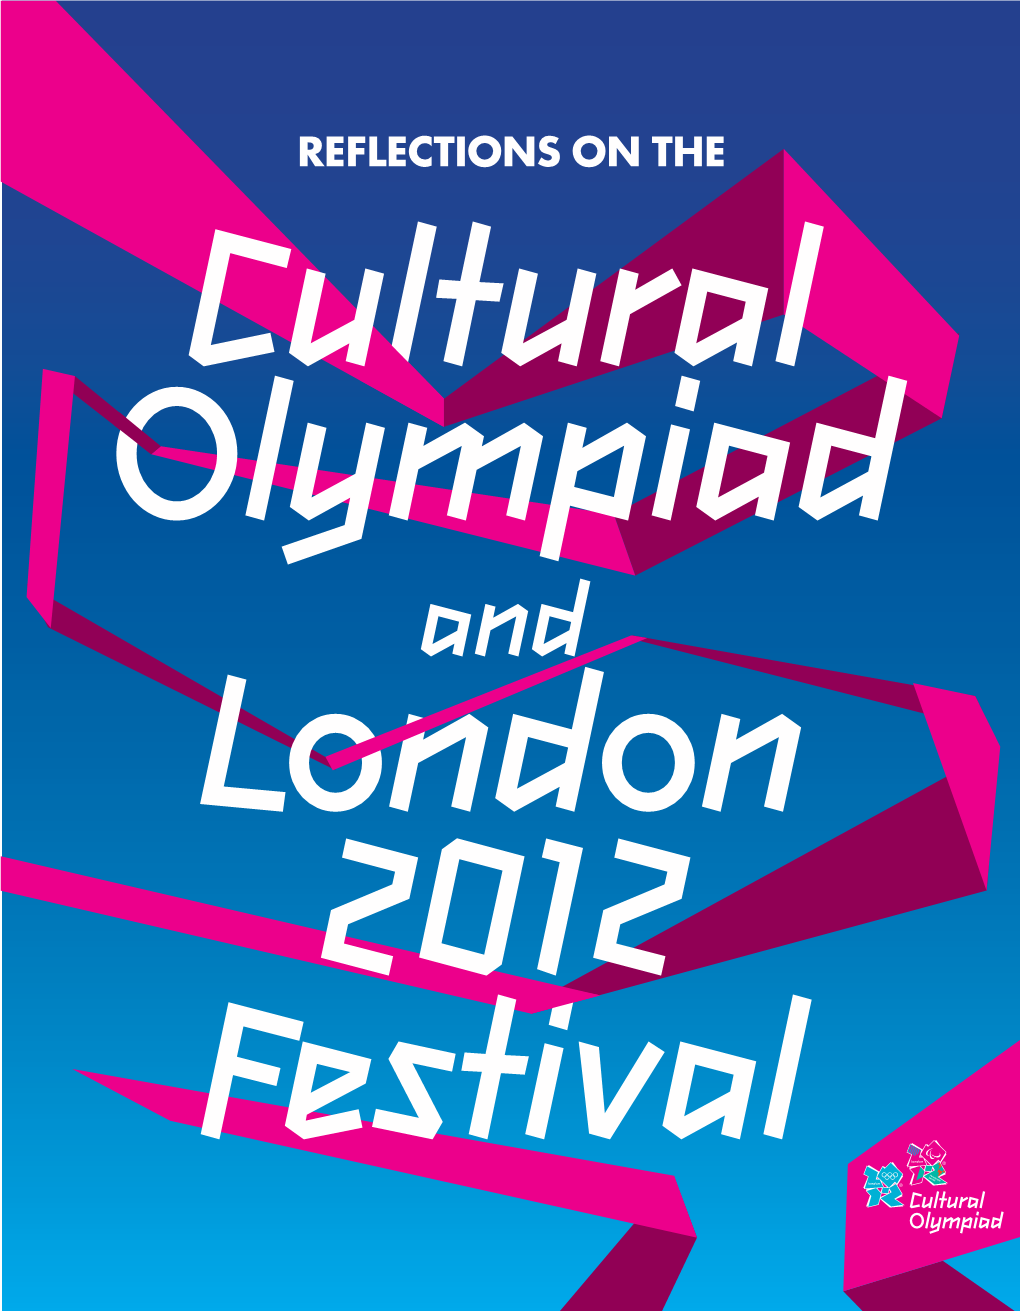 Reflections on the Cultural Olympiad and London 2012 Festival